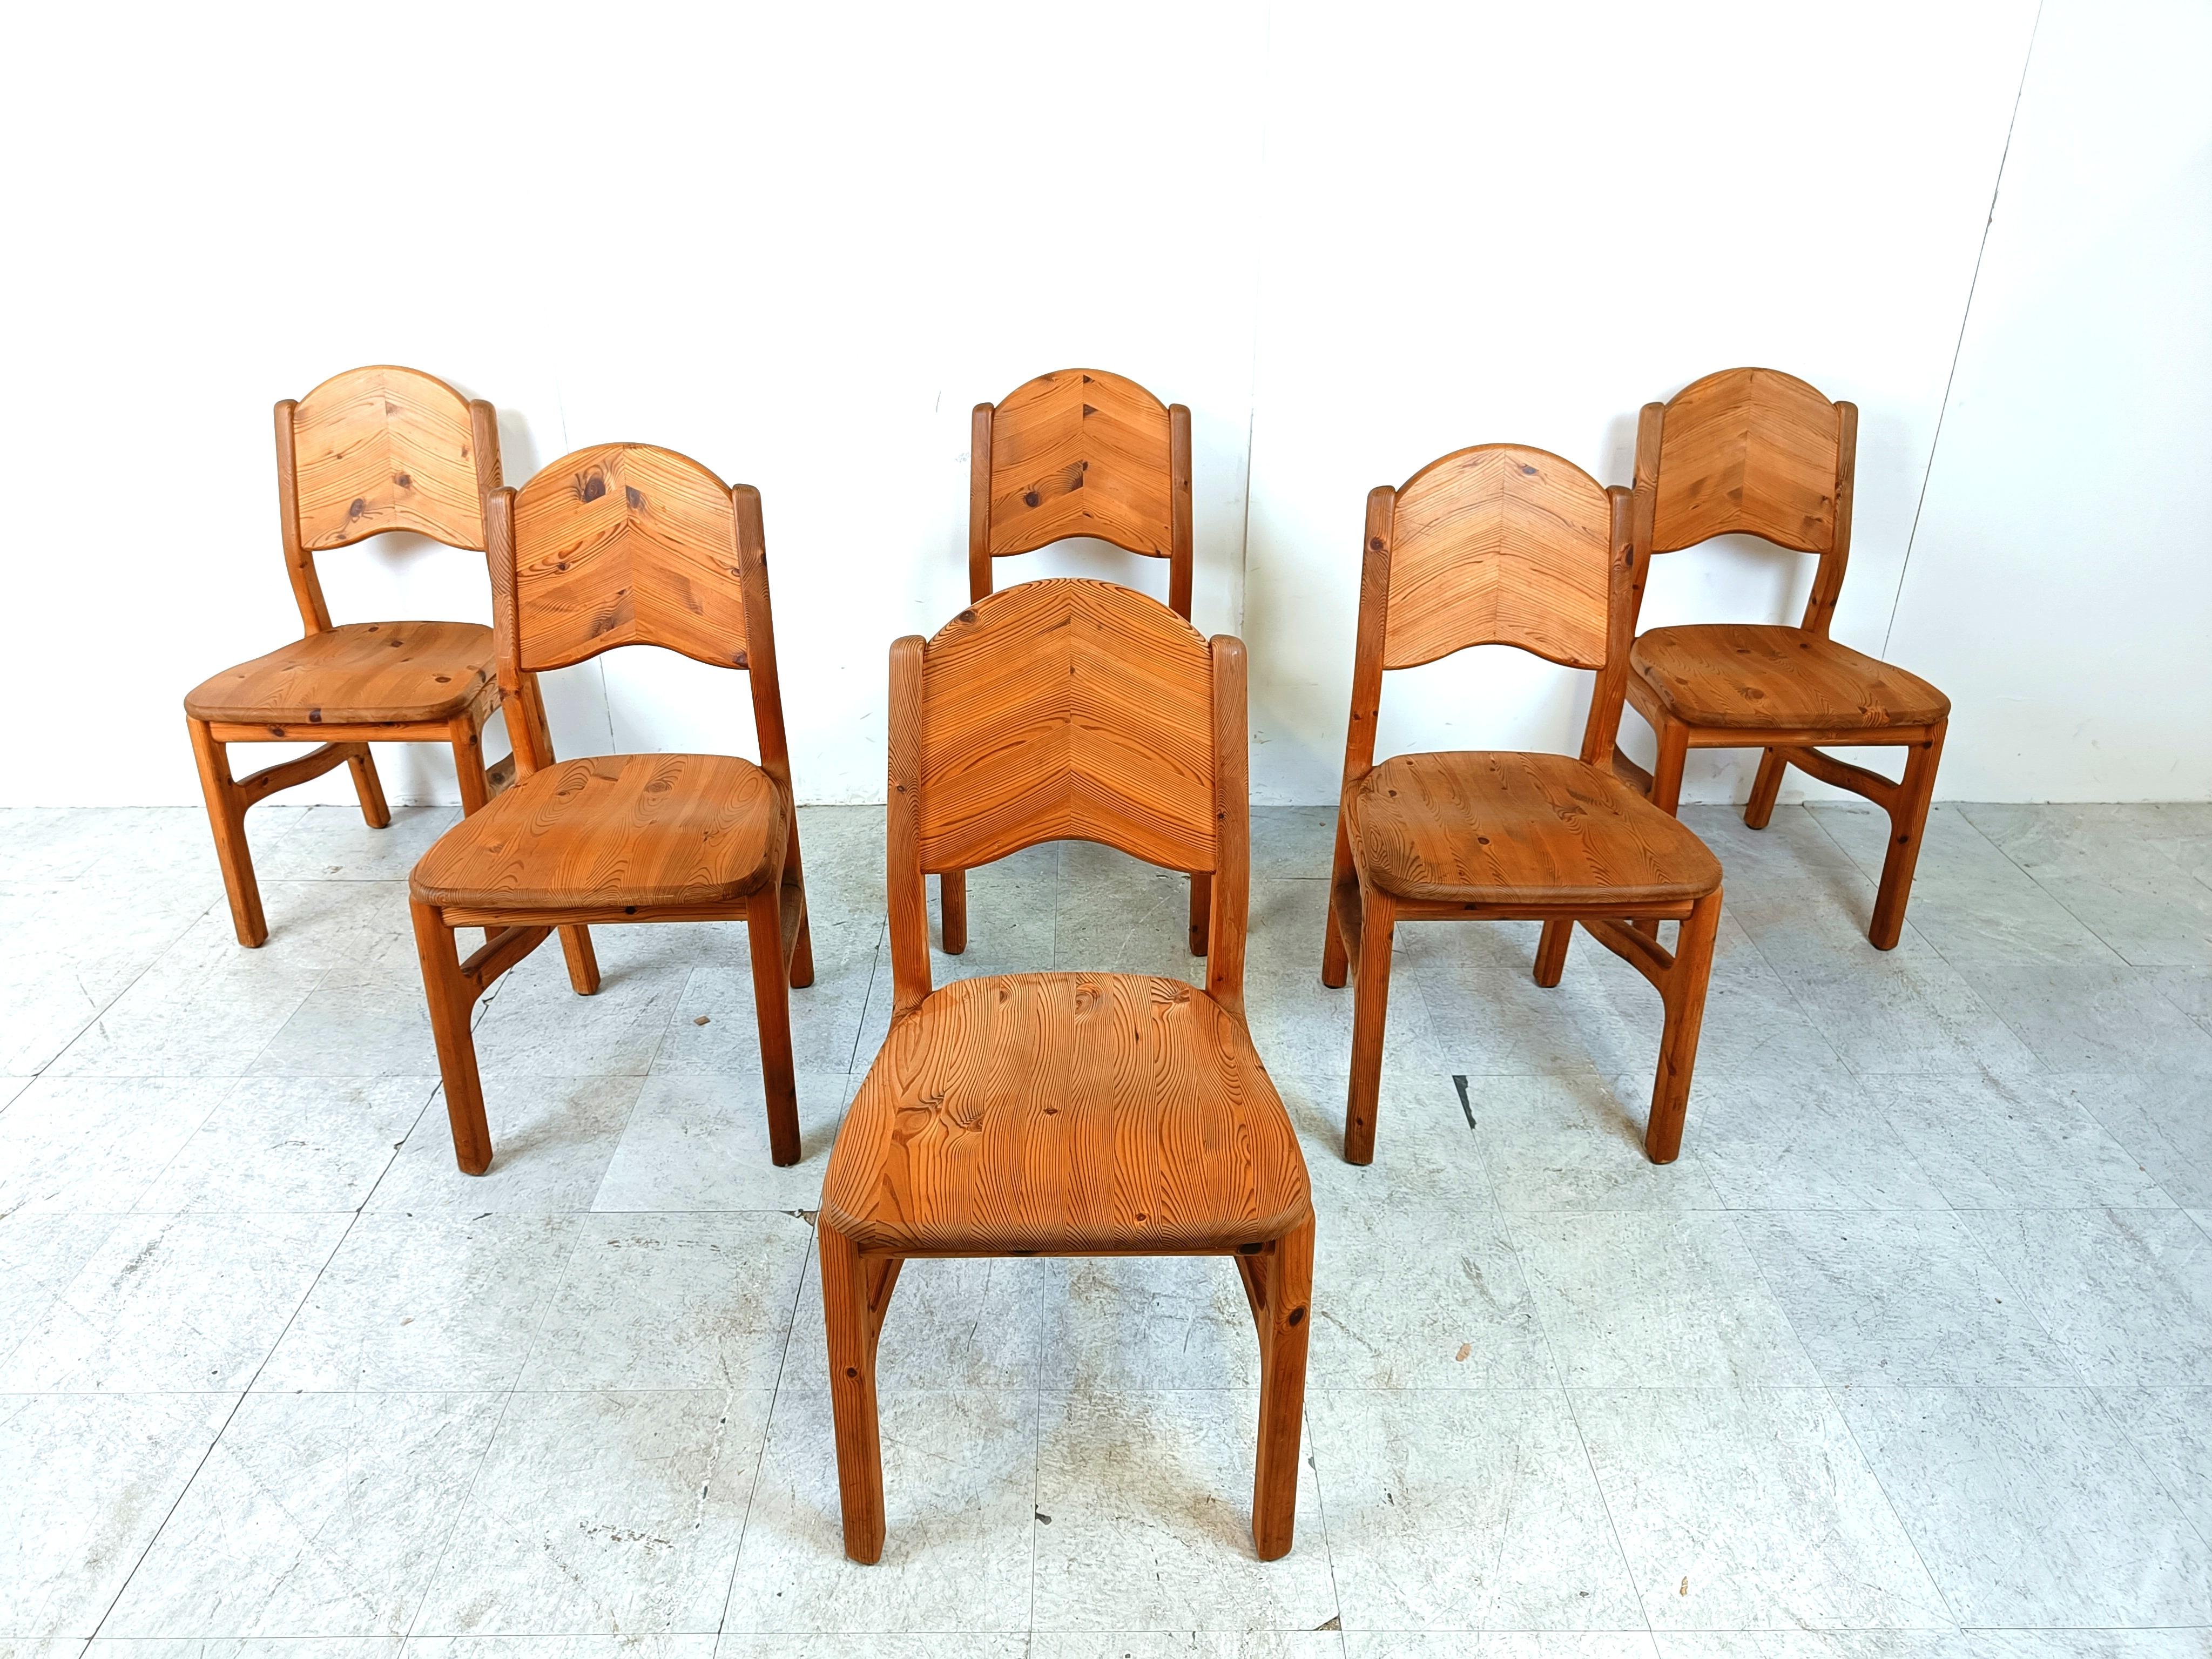 Vintage pine wood dining chairs with a strudy and beautiful design.

Nice and solid chairs.

Timeless and can be combined in lots of interiors.

Good condition

1970s - Denmark 

Dimensions:
Height: 90cm
Depth: 50cm
Width: 45
Seat height: